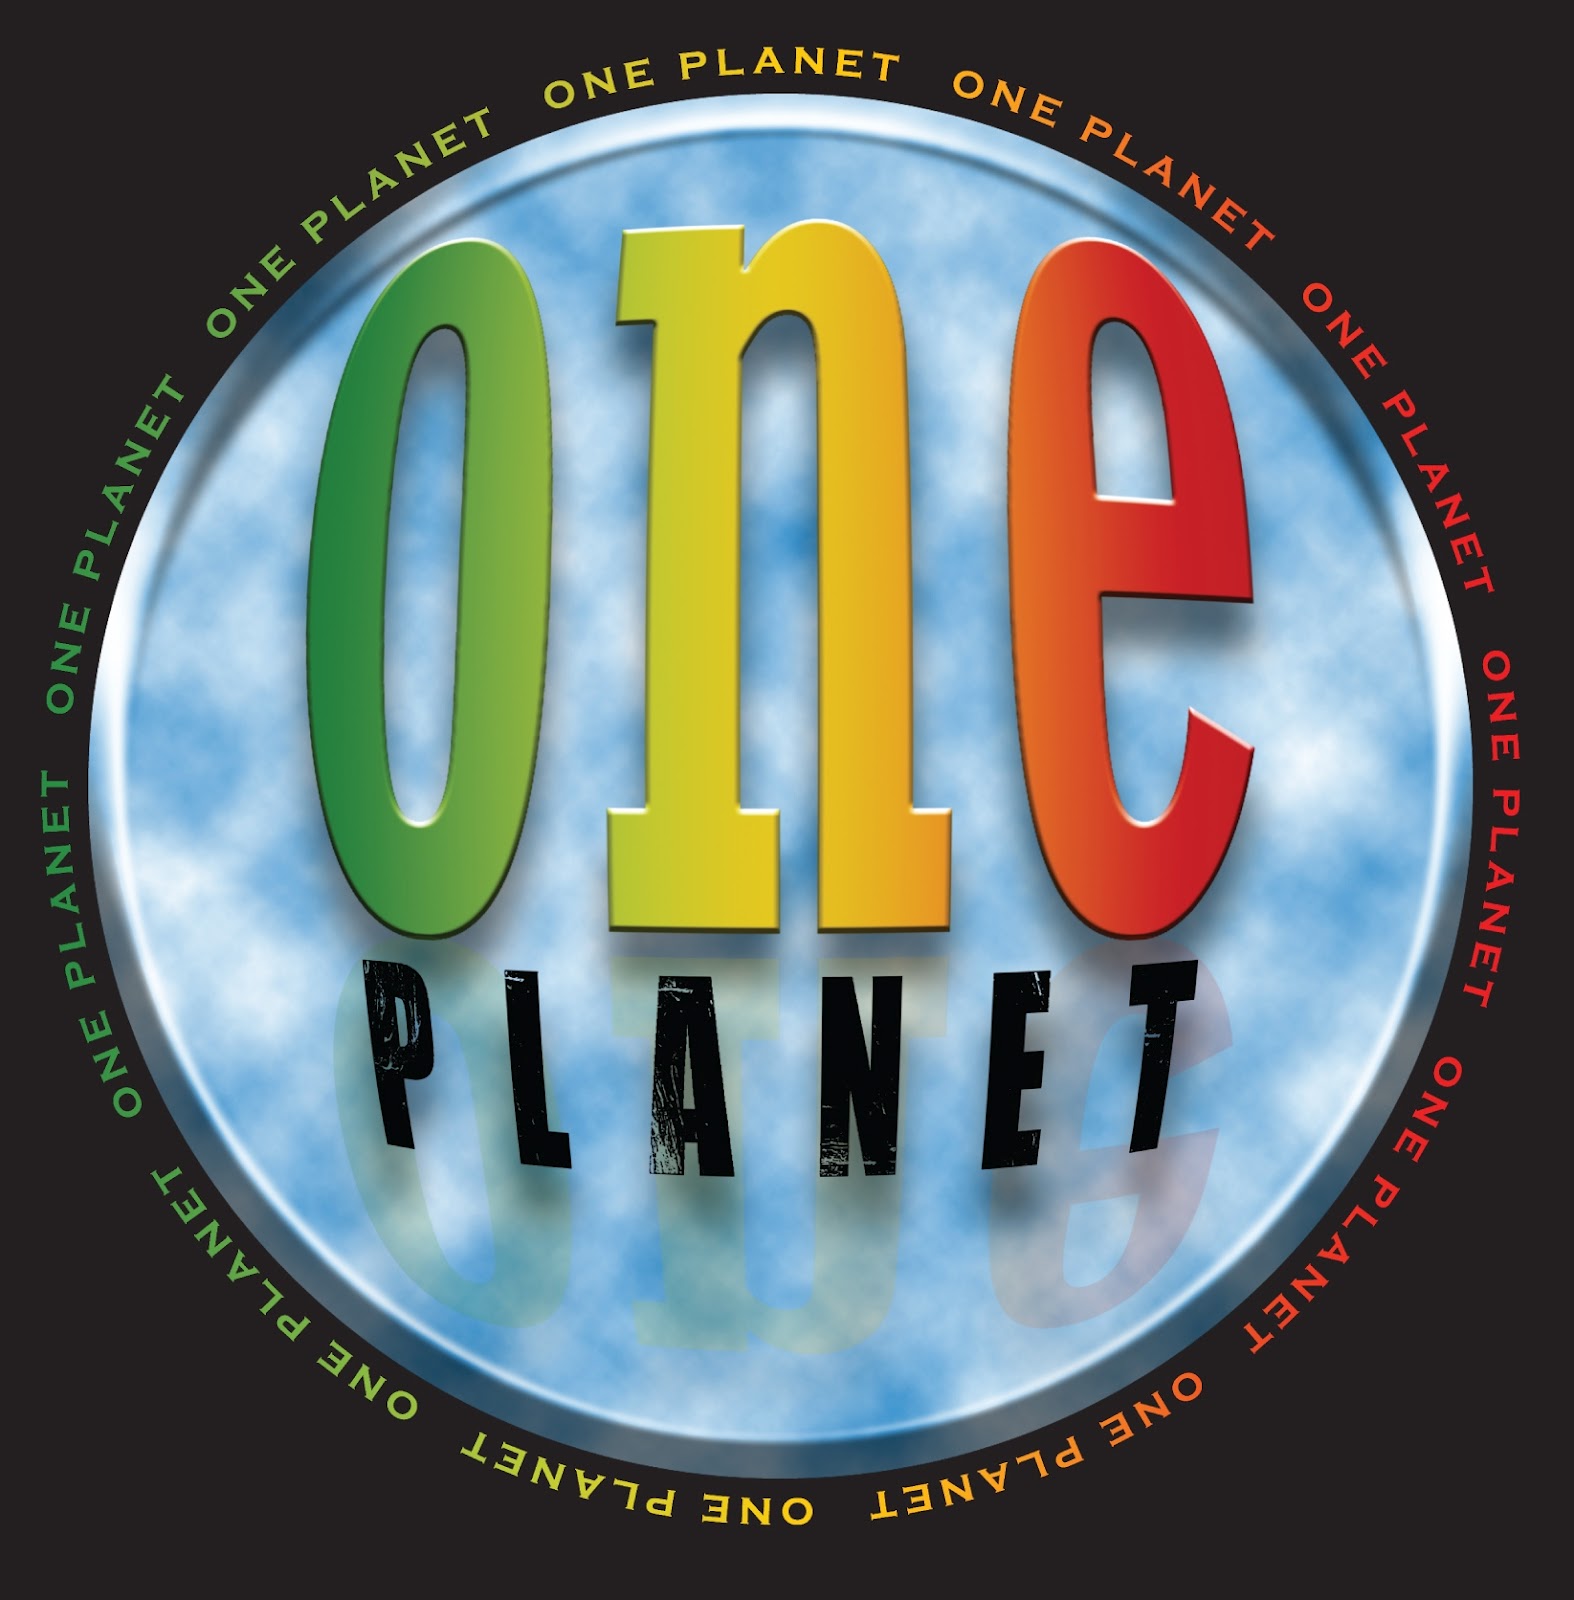 One Planet. 207162096+"Planet Entertainment International Pvt. Ltd.". 55800386+"Planet Entertainment International Pvt. Ltd.". Planet first